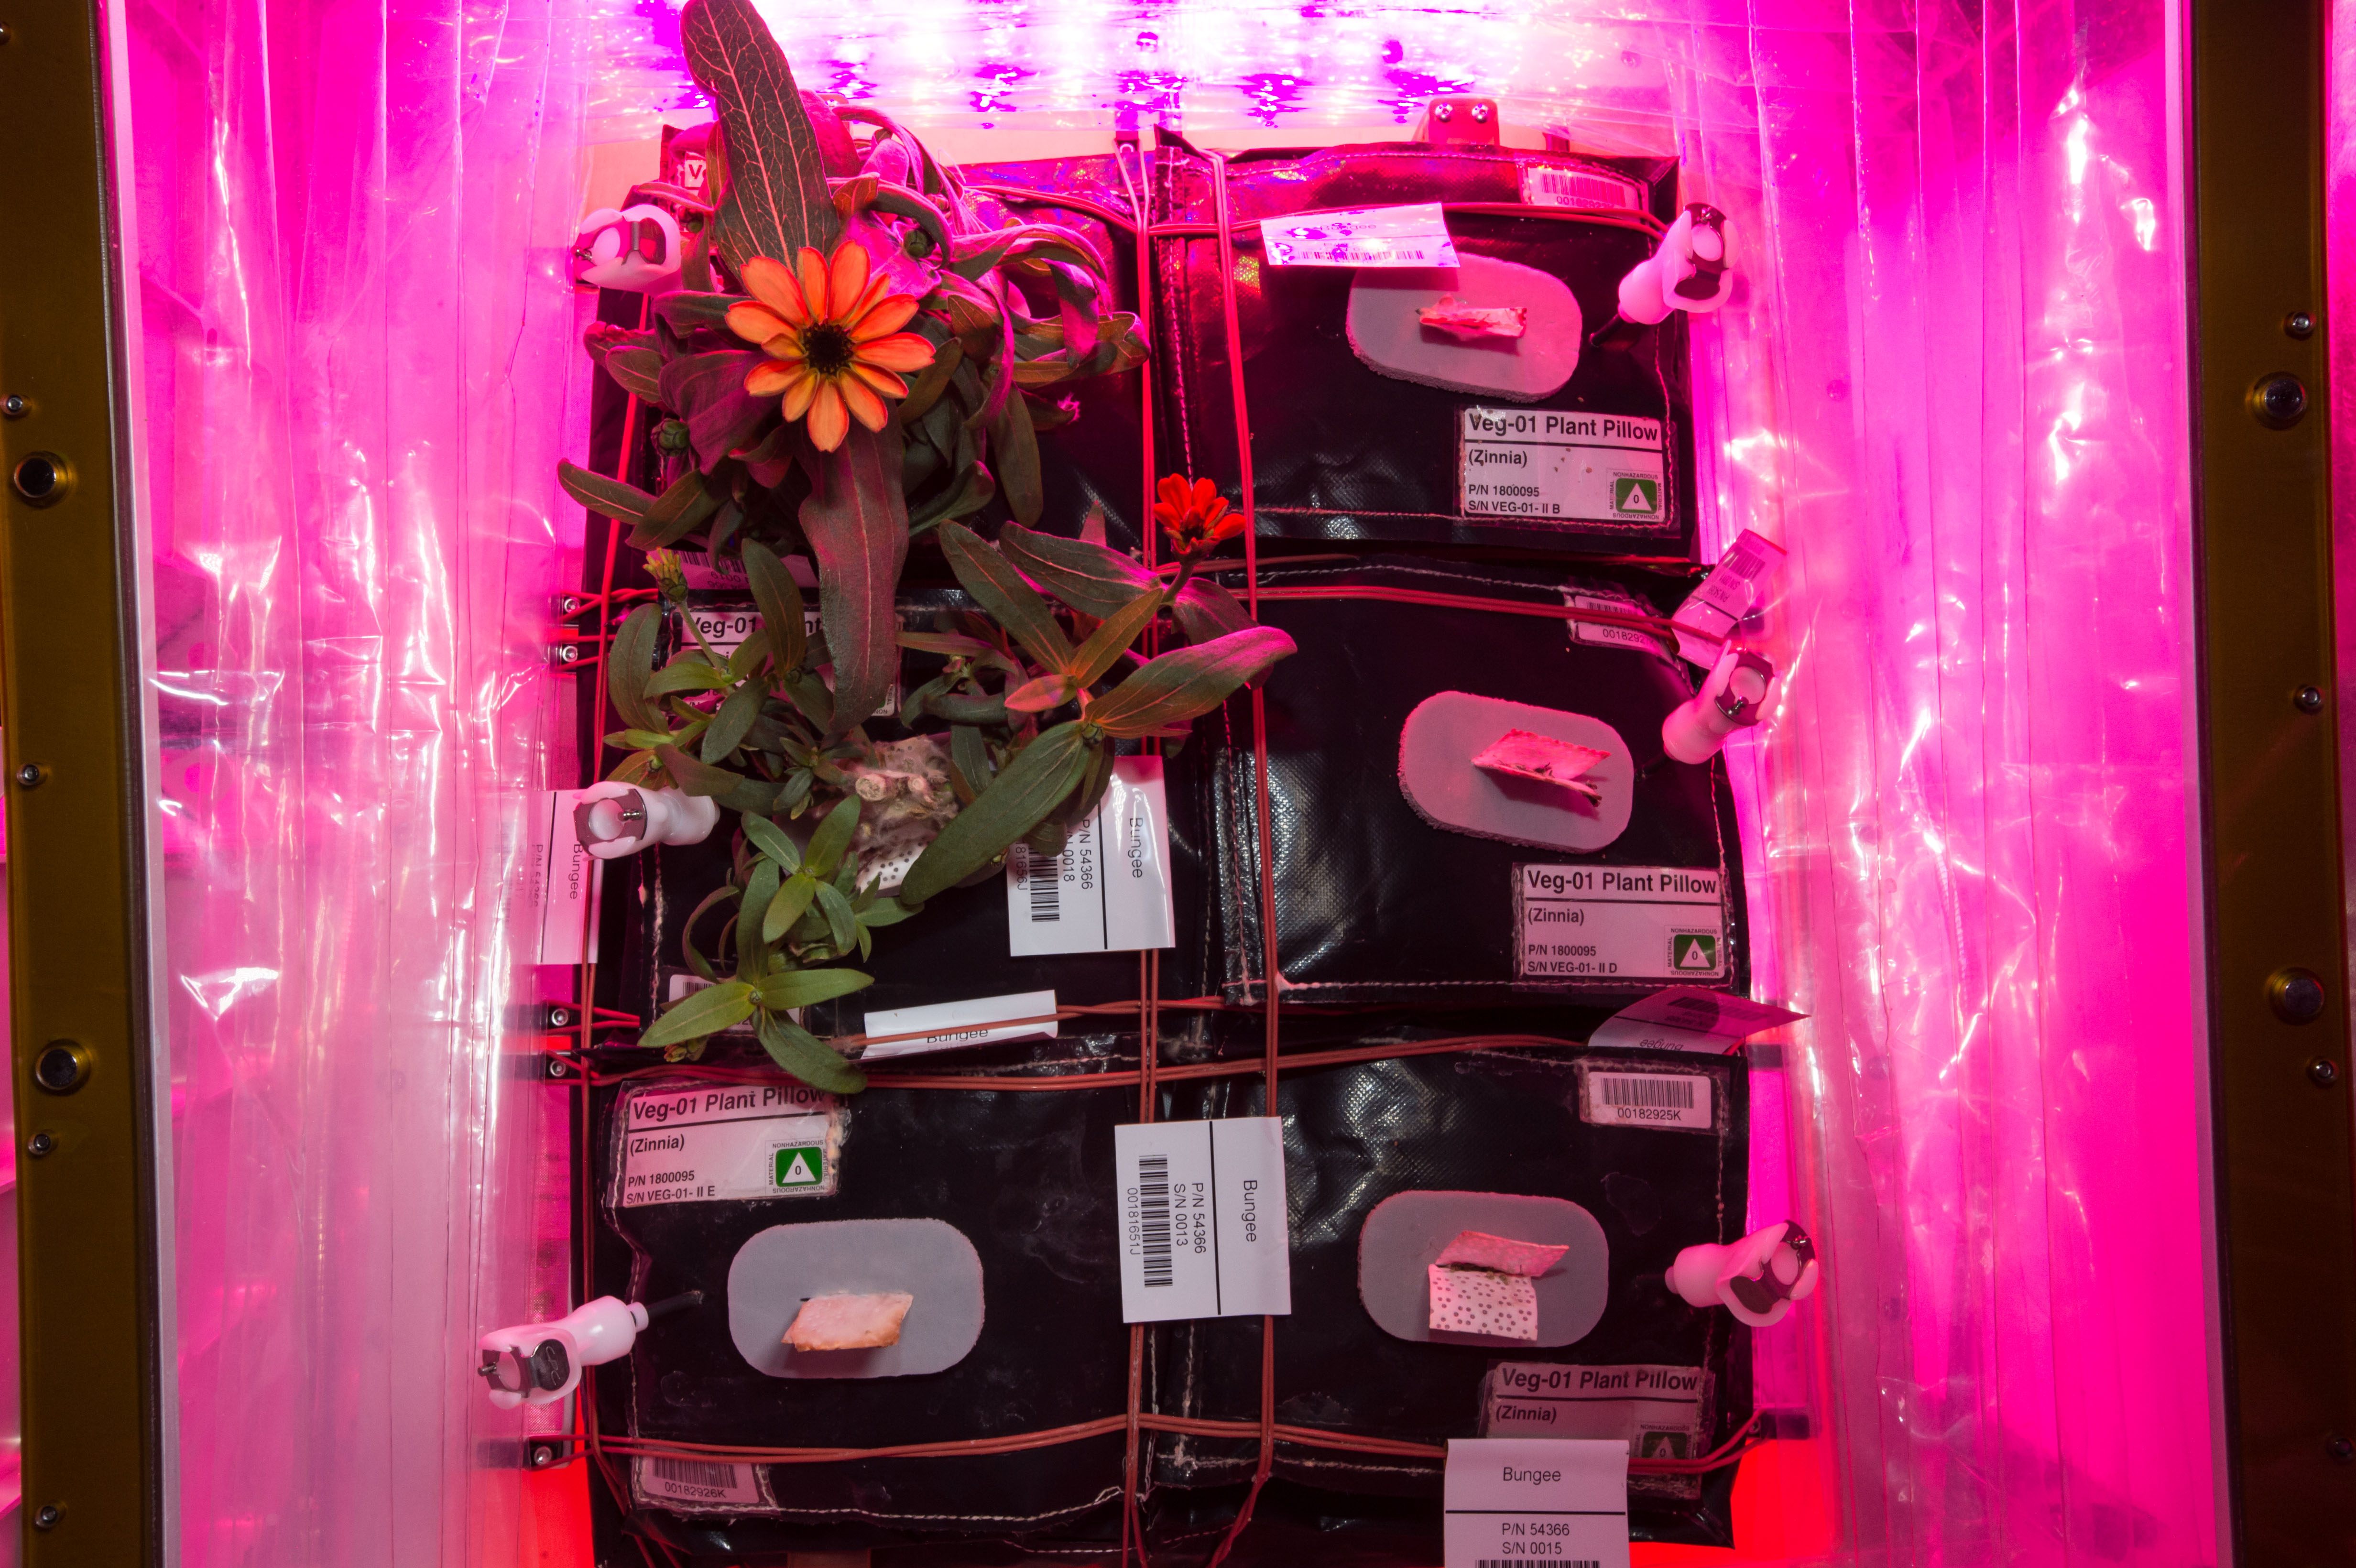 The Vegetable Production System (“Veggie”) aboard the ISS grows plants in microgravity using LED lights.